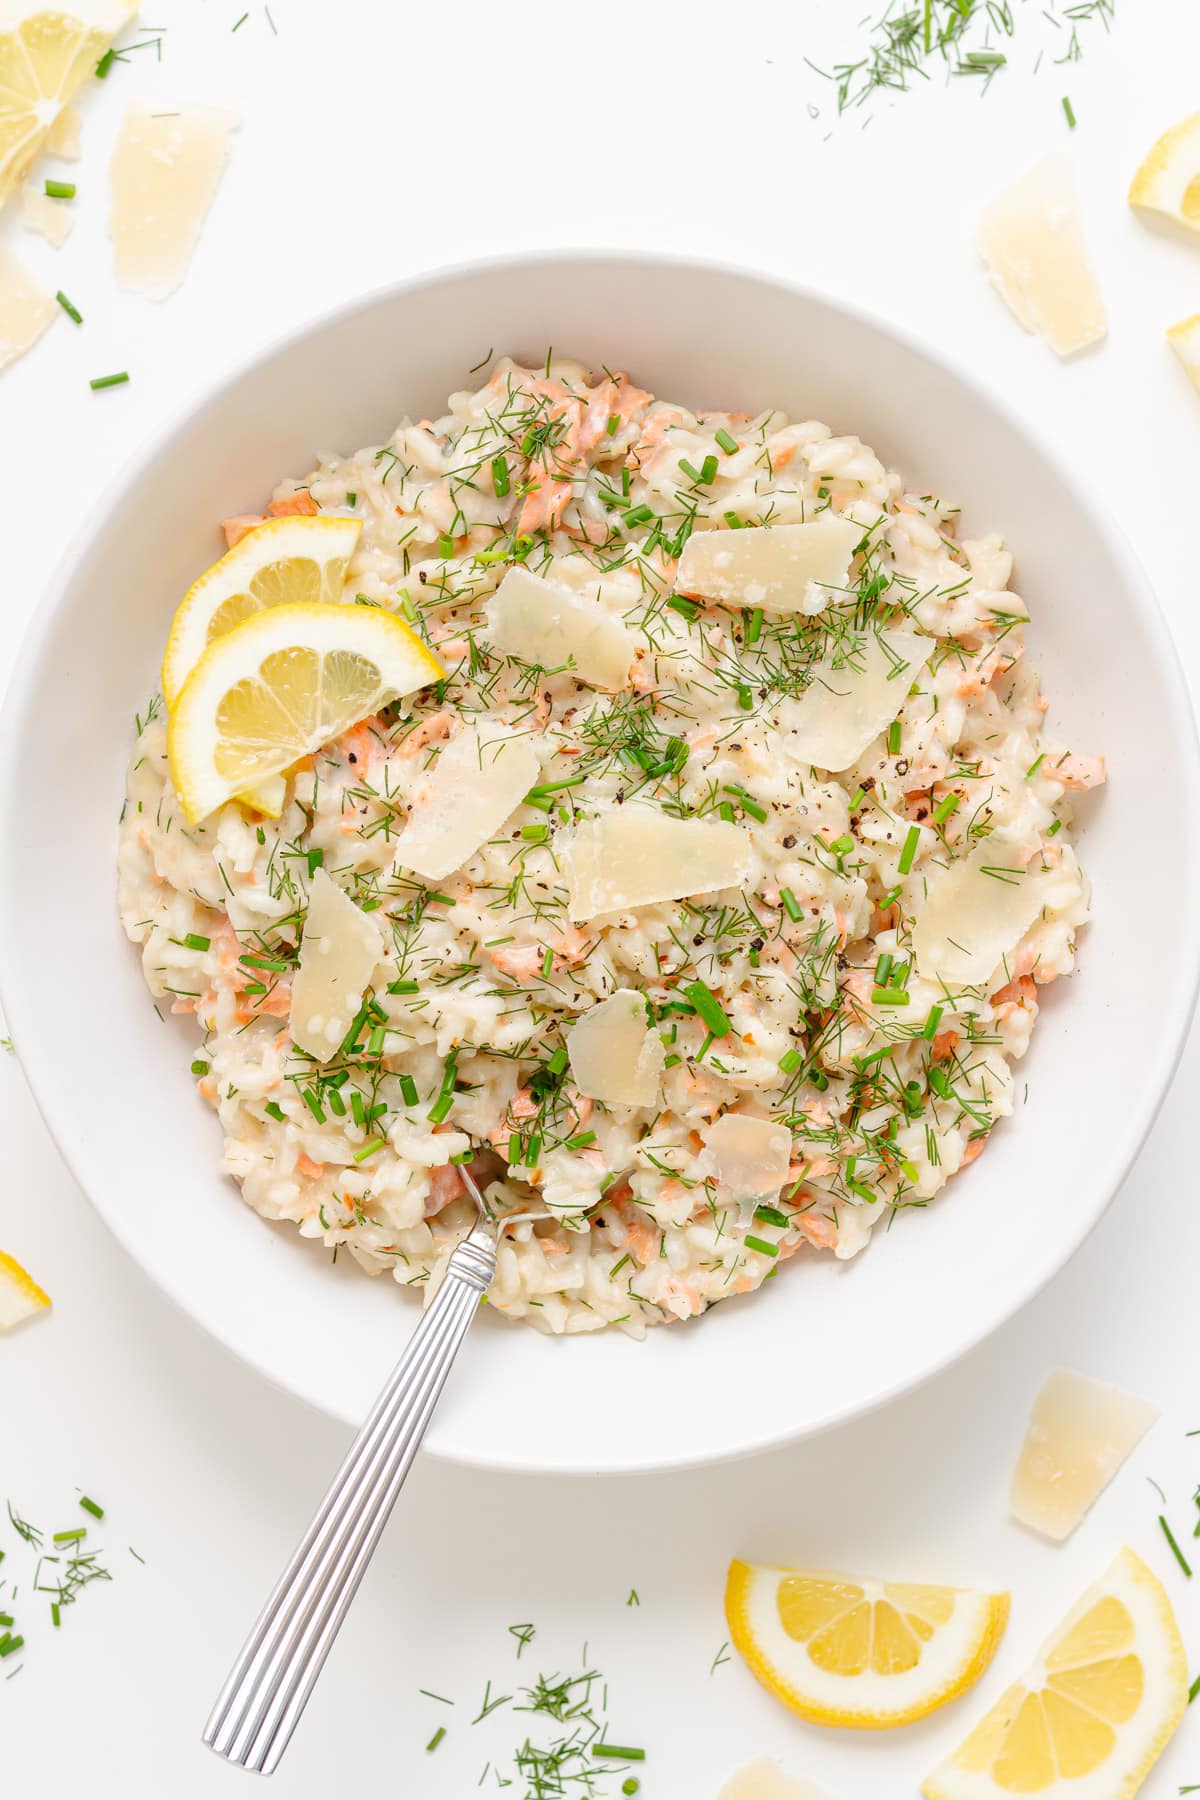 Salmon risotto in white bowl with spoon, garnished with lemon slices, parmesan shavings, fresh dill and chives.